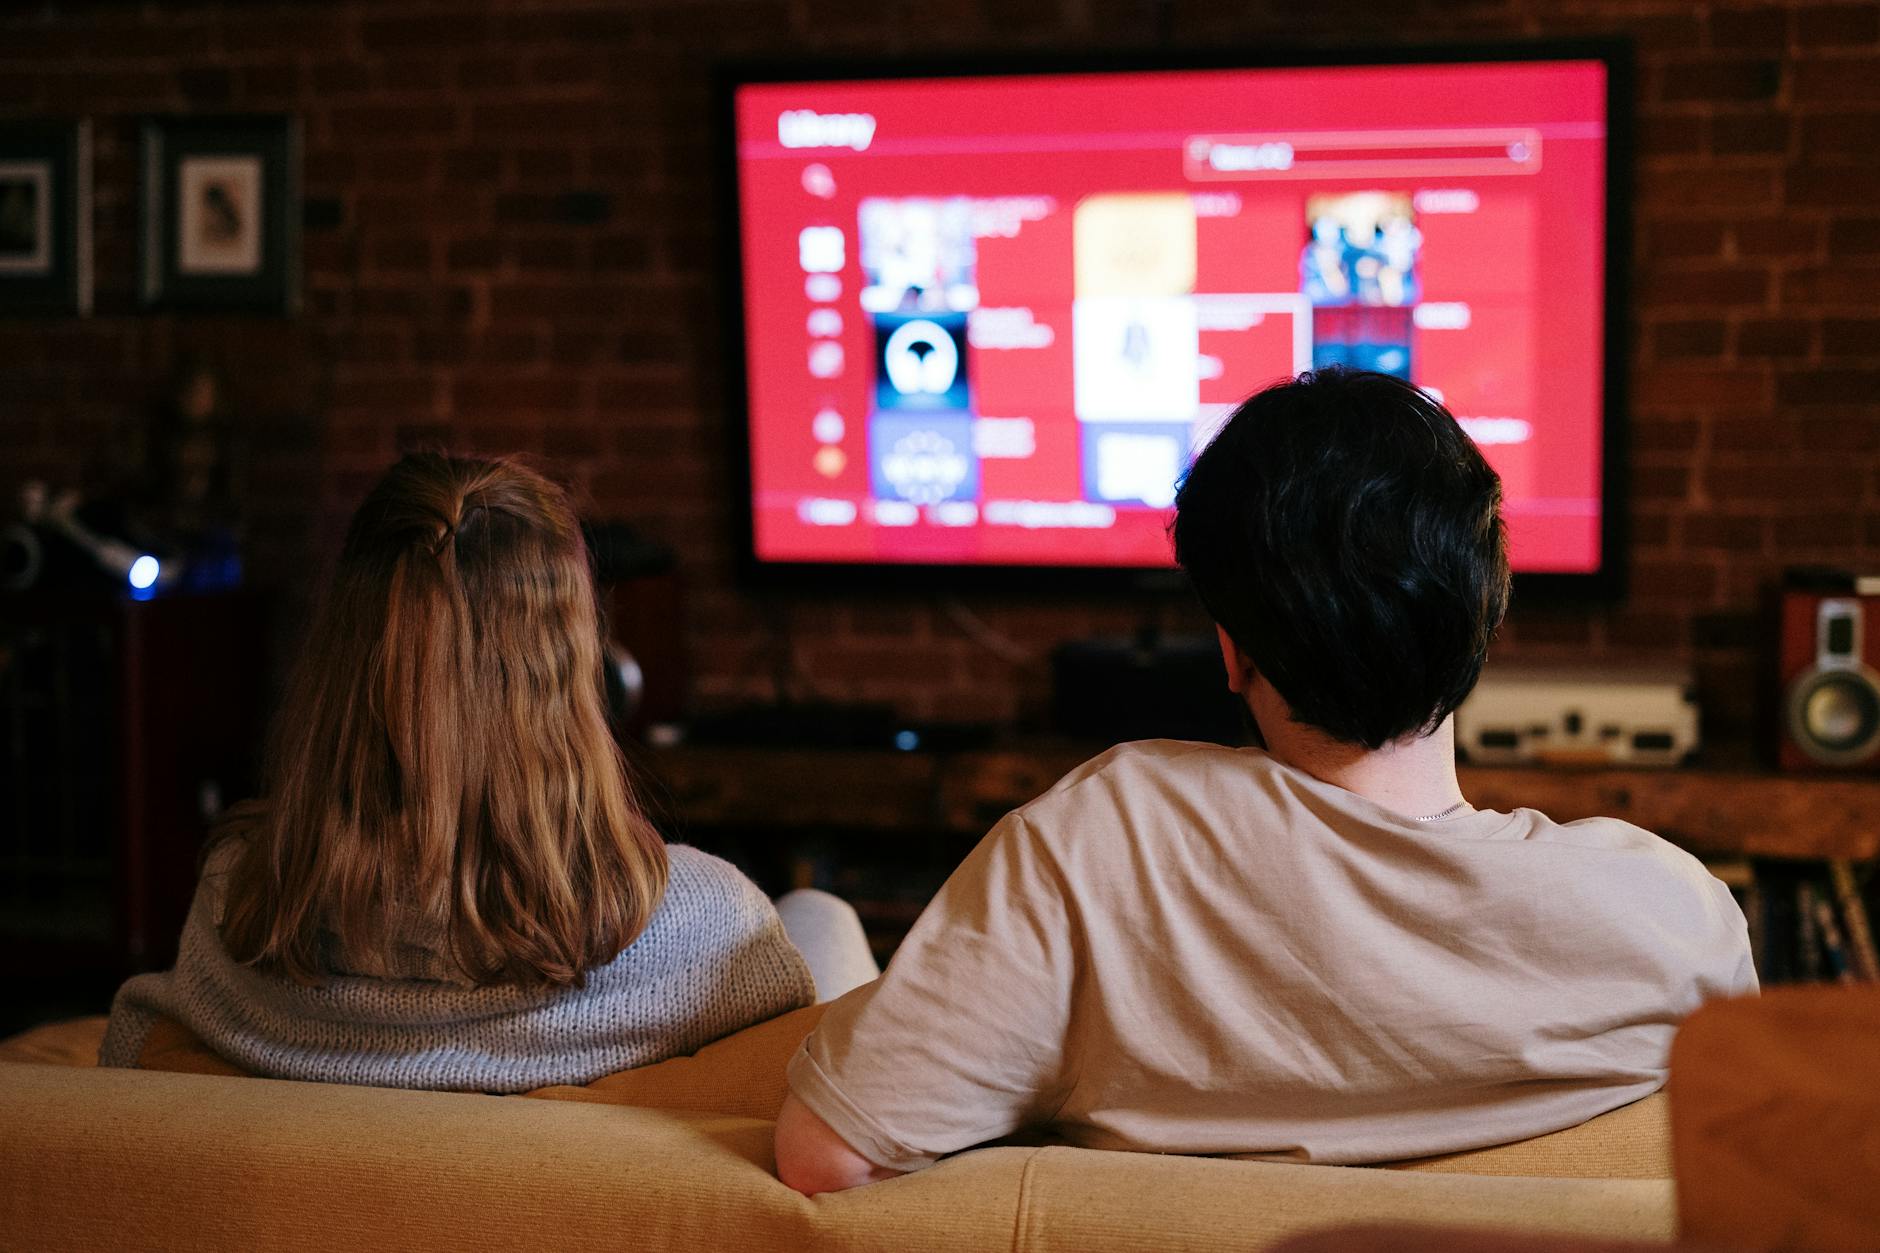 How to Maximizing Value and Minimizing Costs with Your Smart TV